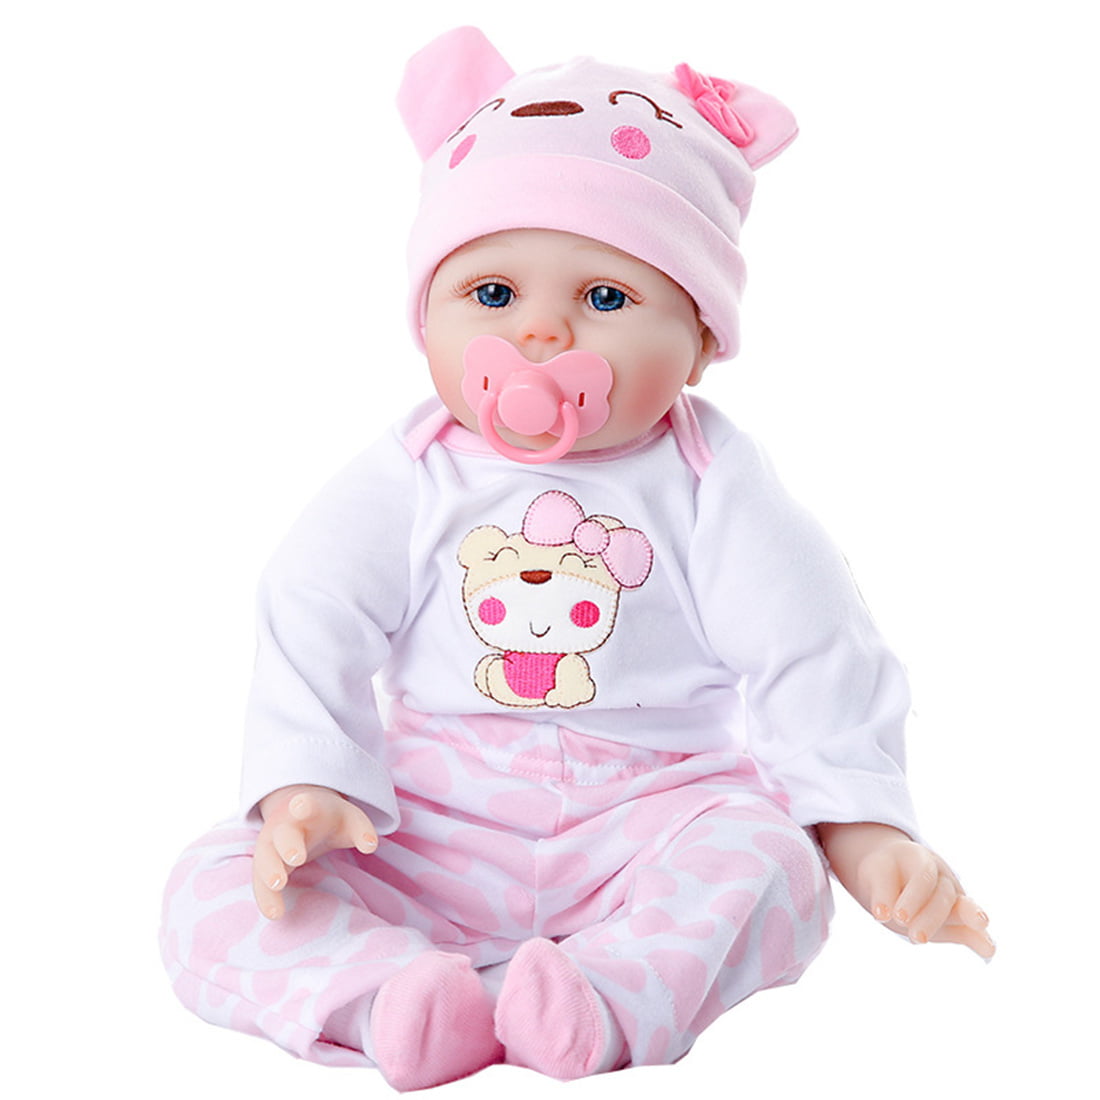 22 Inches Cute Sweet Reborn Baby Doll Silicone Doll Set Cloth Body Doll (Clothing As Shown